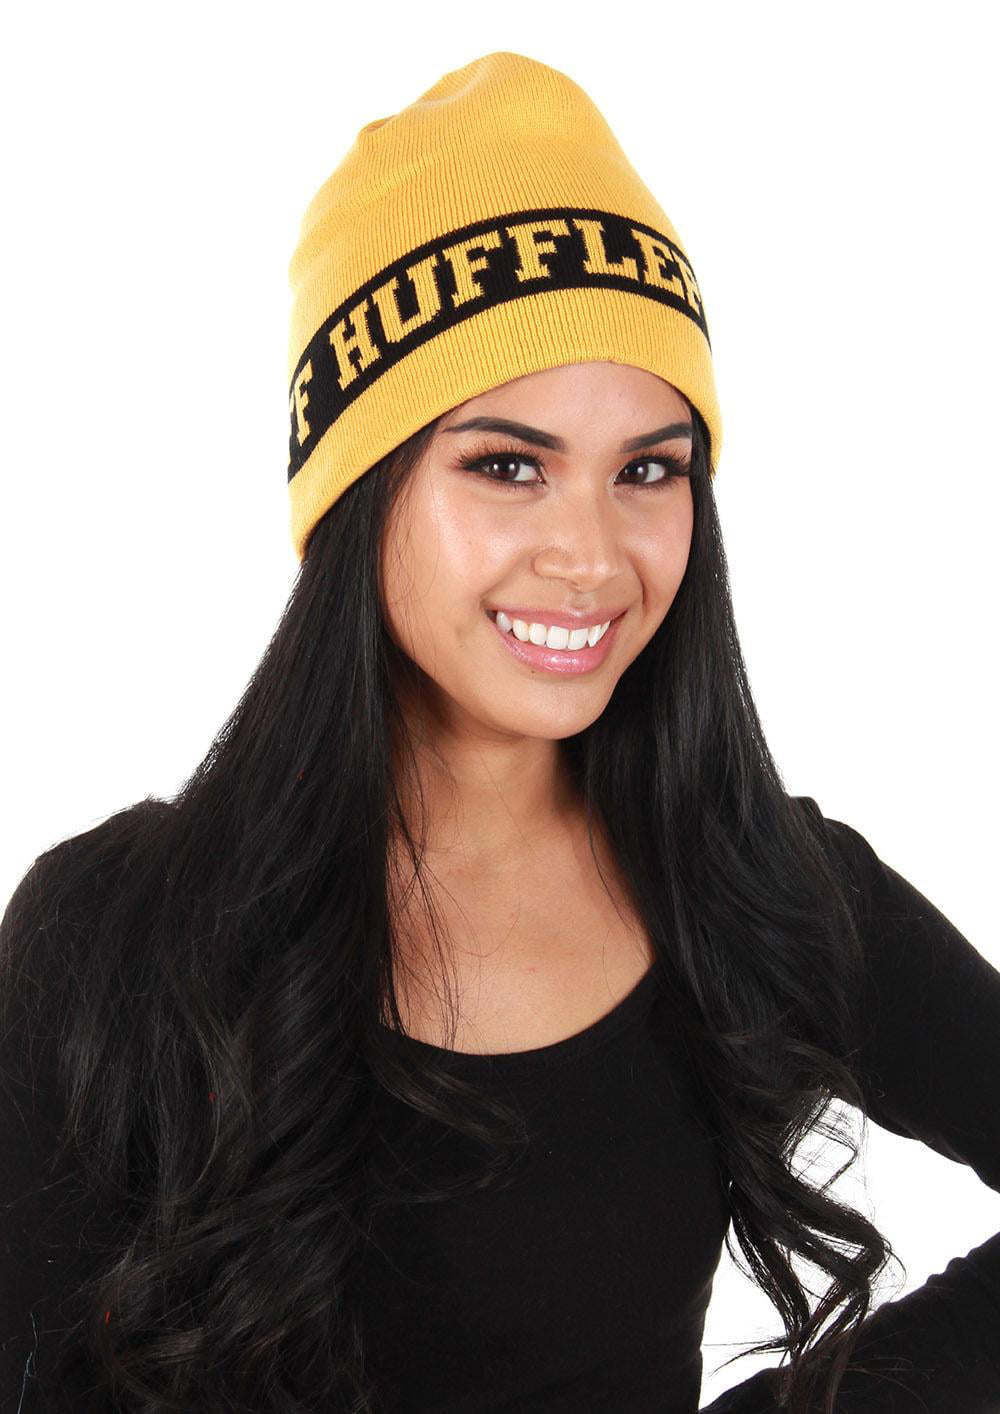 Harry Potter Huffllepuff Cosplay Costume Warmth Hat Beanies Cap New 